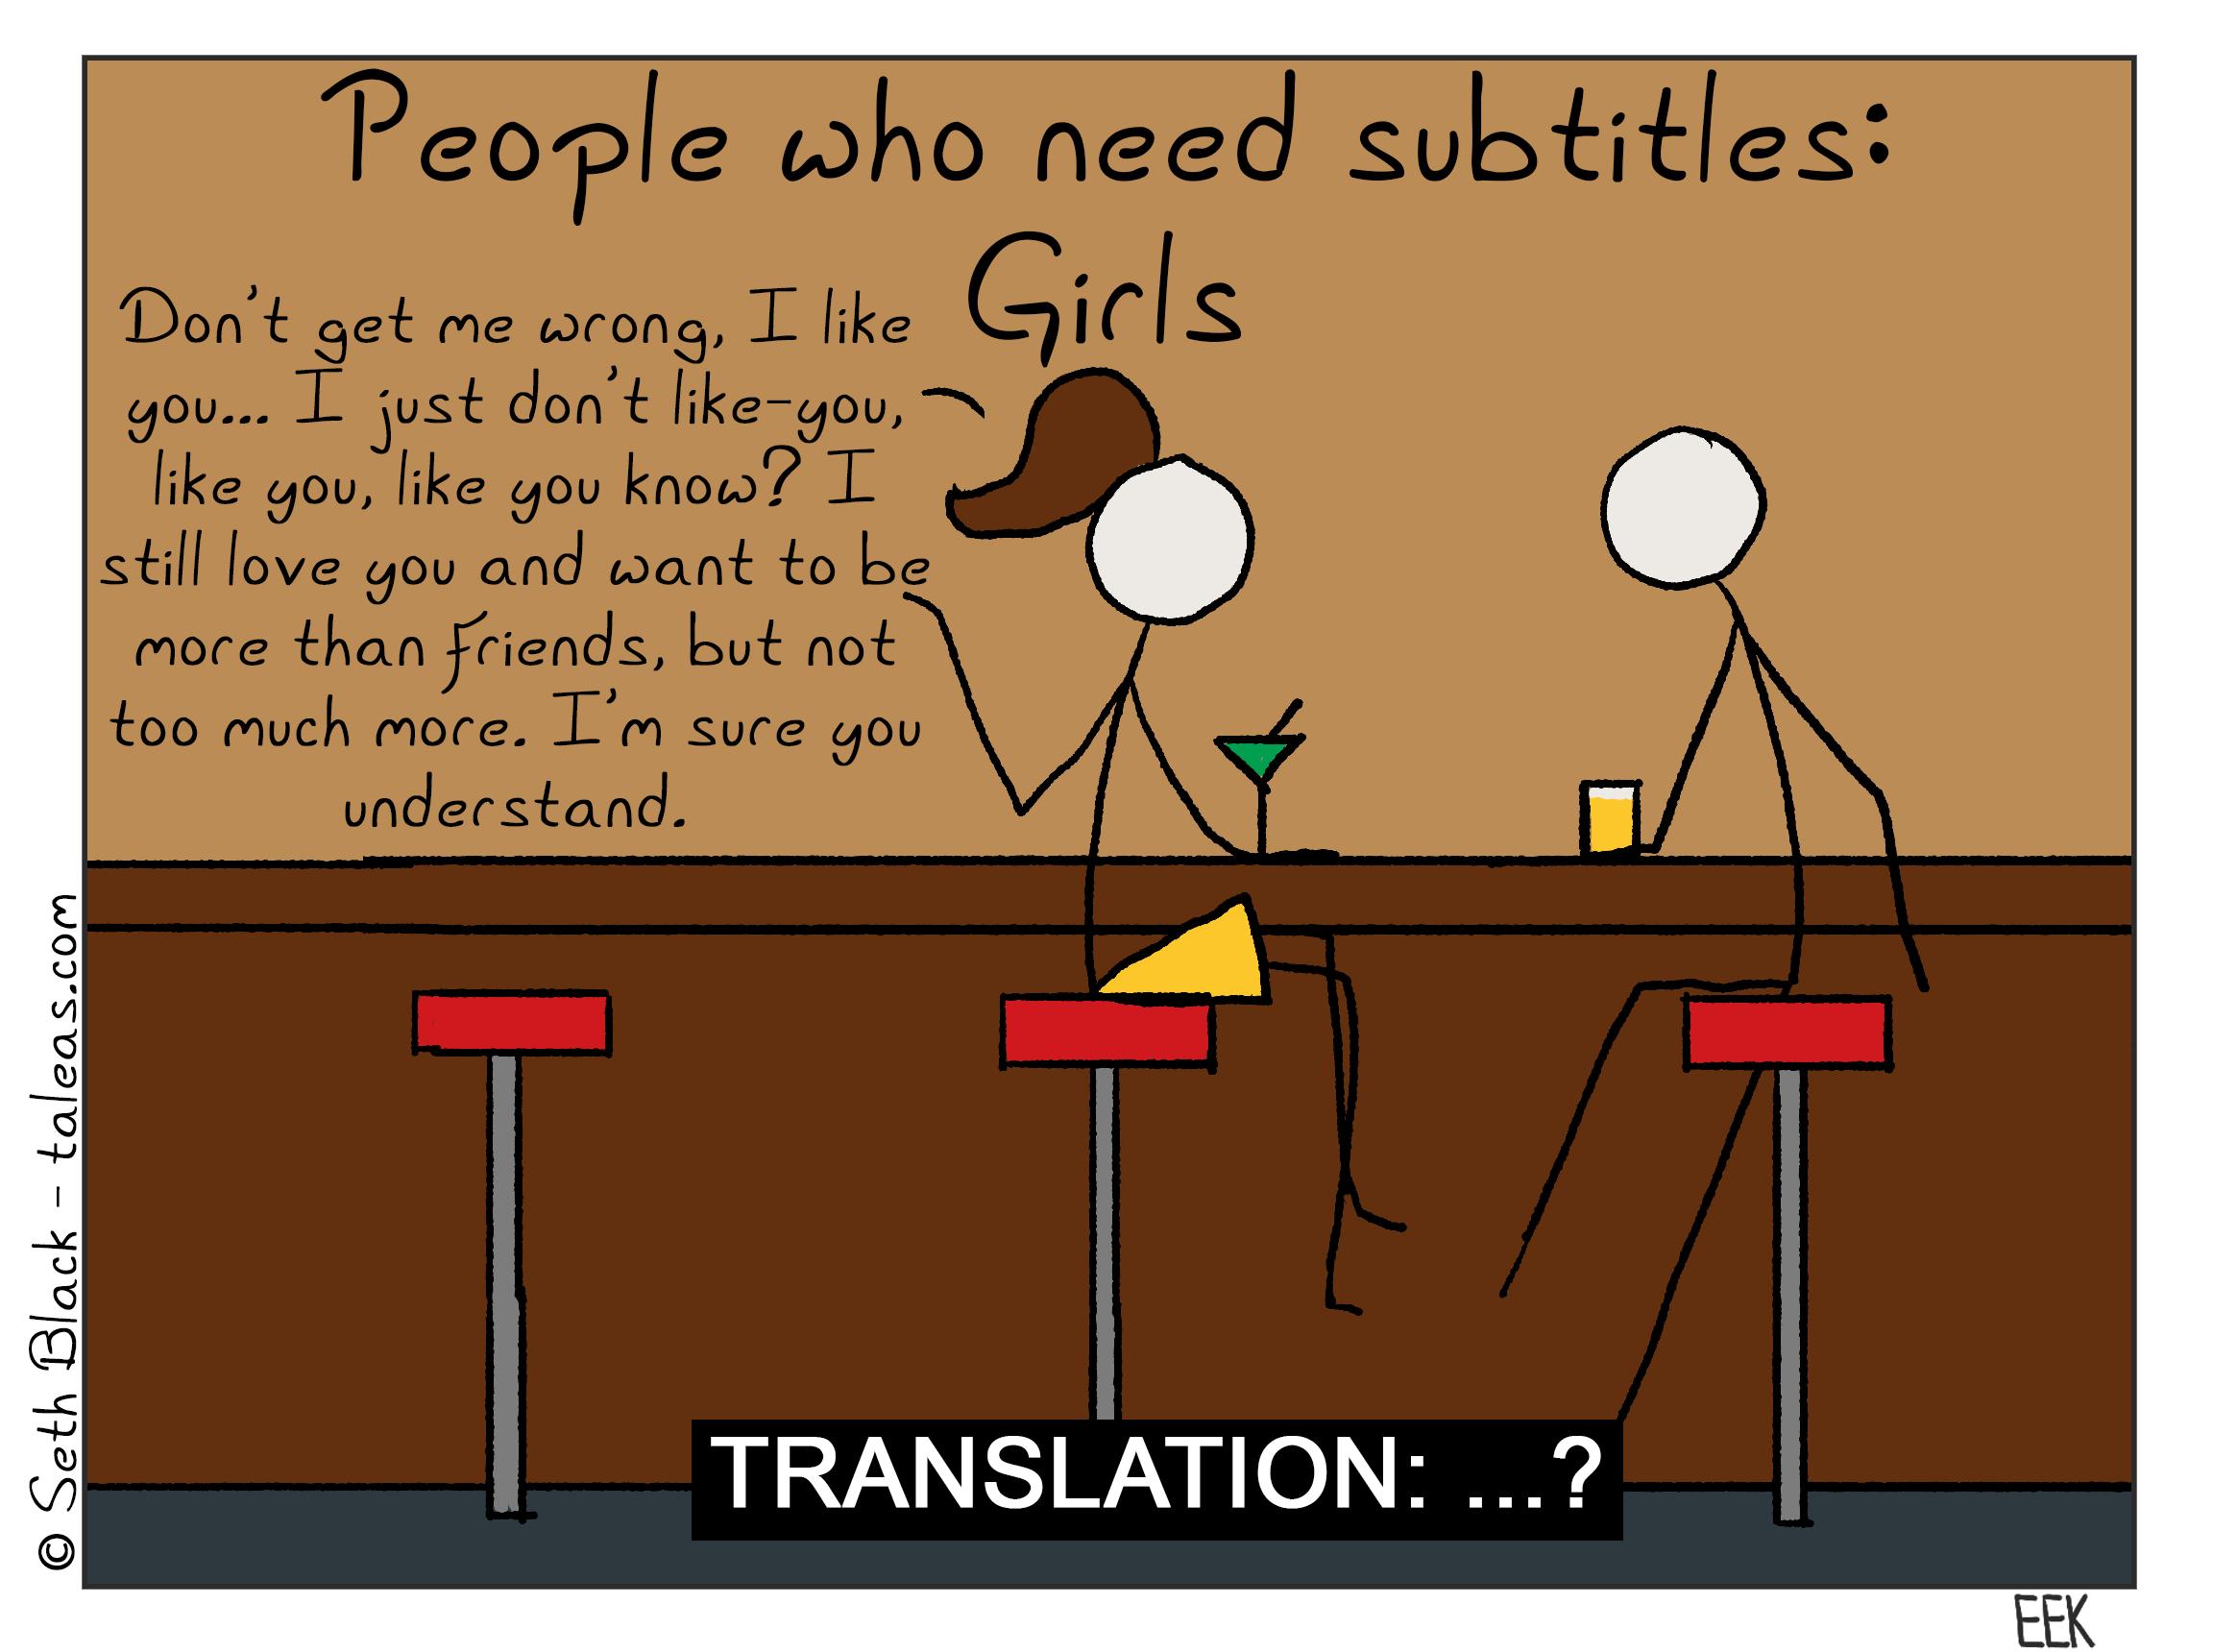 People who need subtitles: girls. "Don't get me wrong. I like you...I just don't like-you like you; like, you know? I still love you and I want to be more than friends, but not too much more. I'm sure you understand." Translation: "...?"